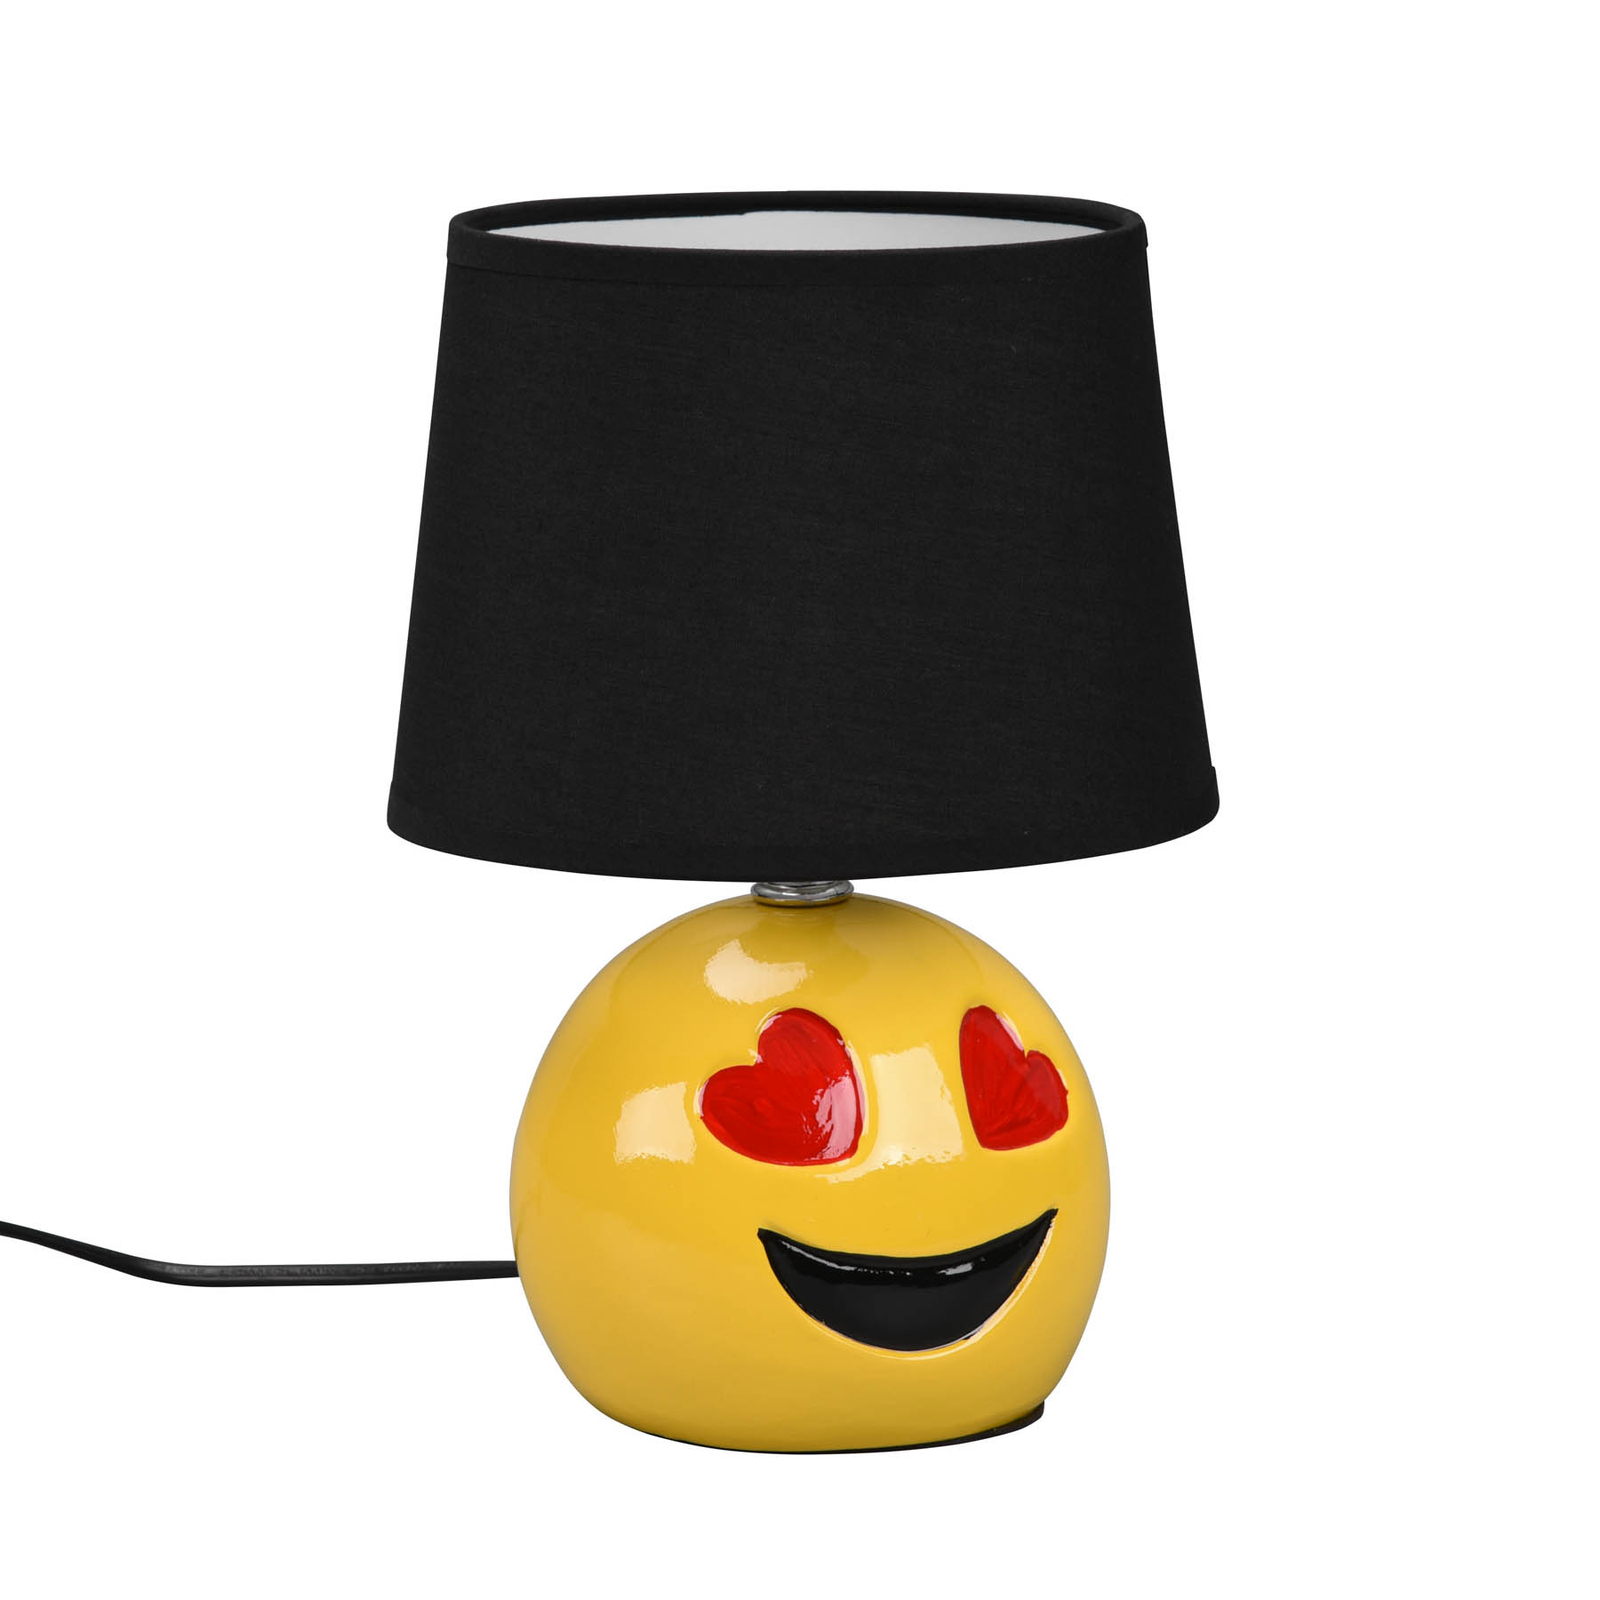 Lovely table lamp, smiley, black fabric lampshade